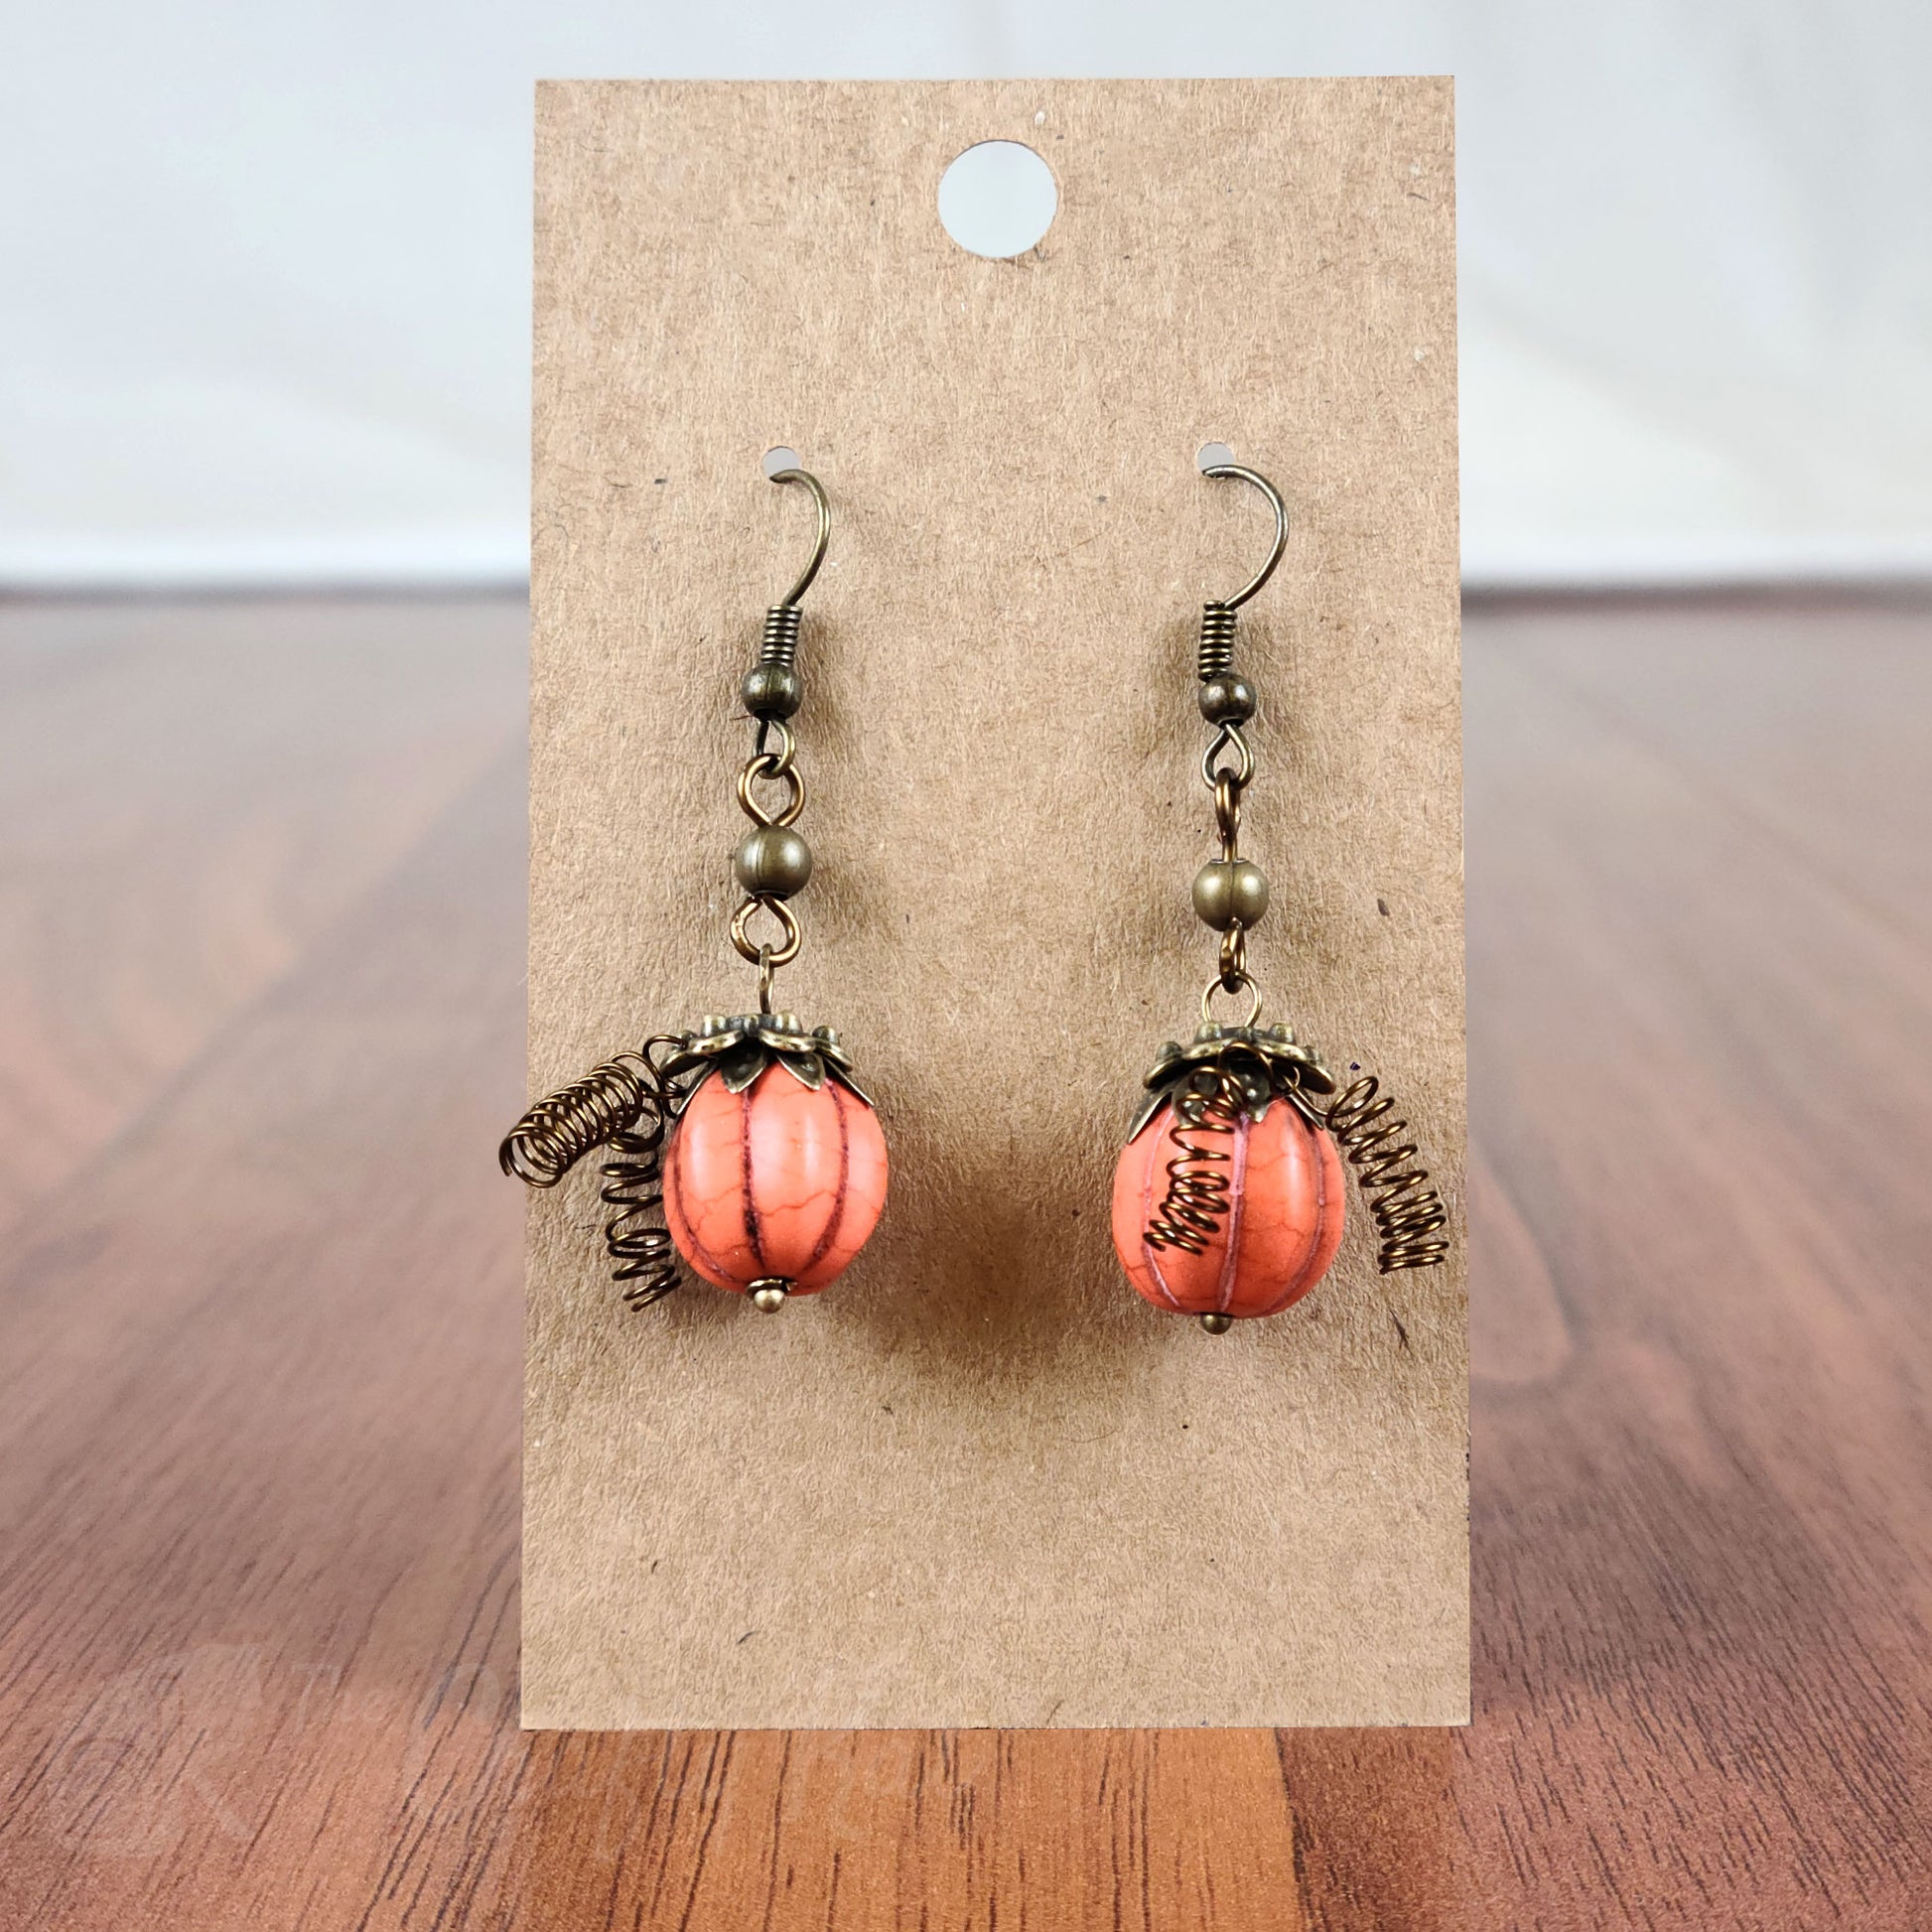 Drop earrings made of orange-dyed reconstituted turquoise corrugated beads and base metal fittings with bronze finish.